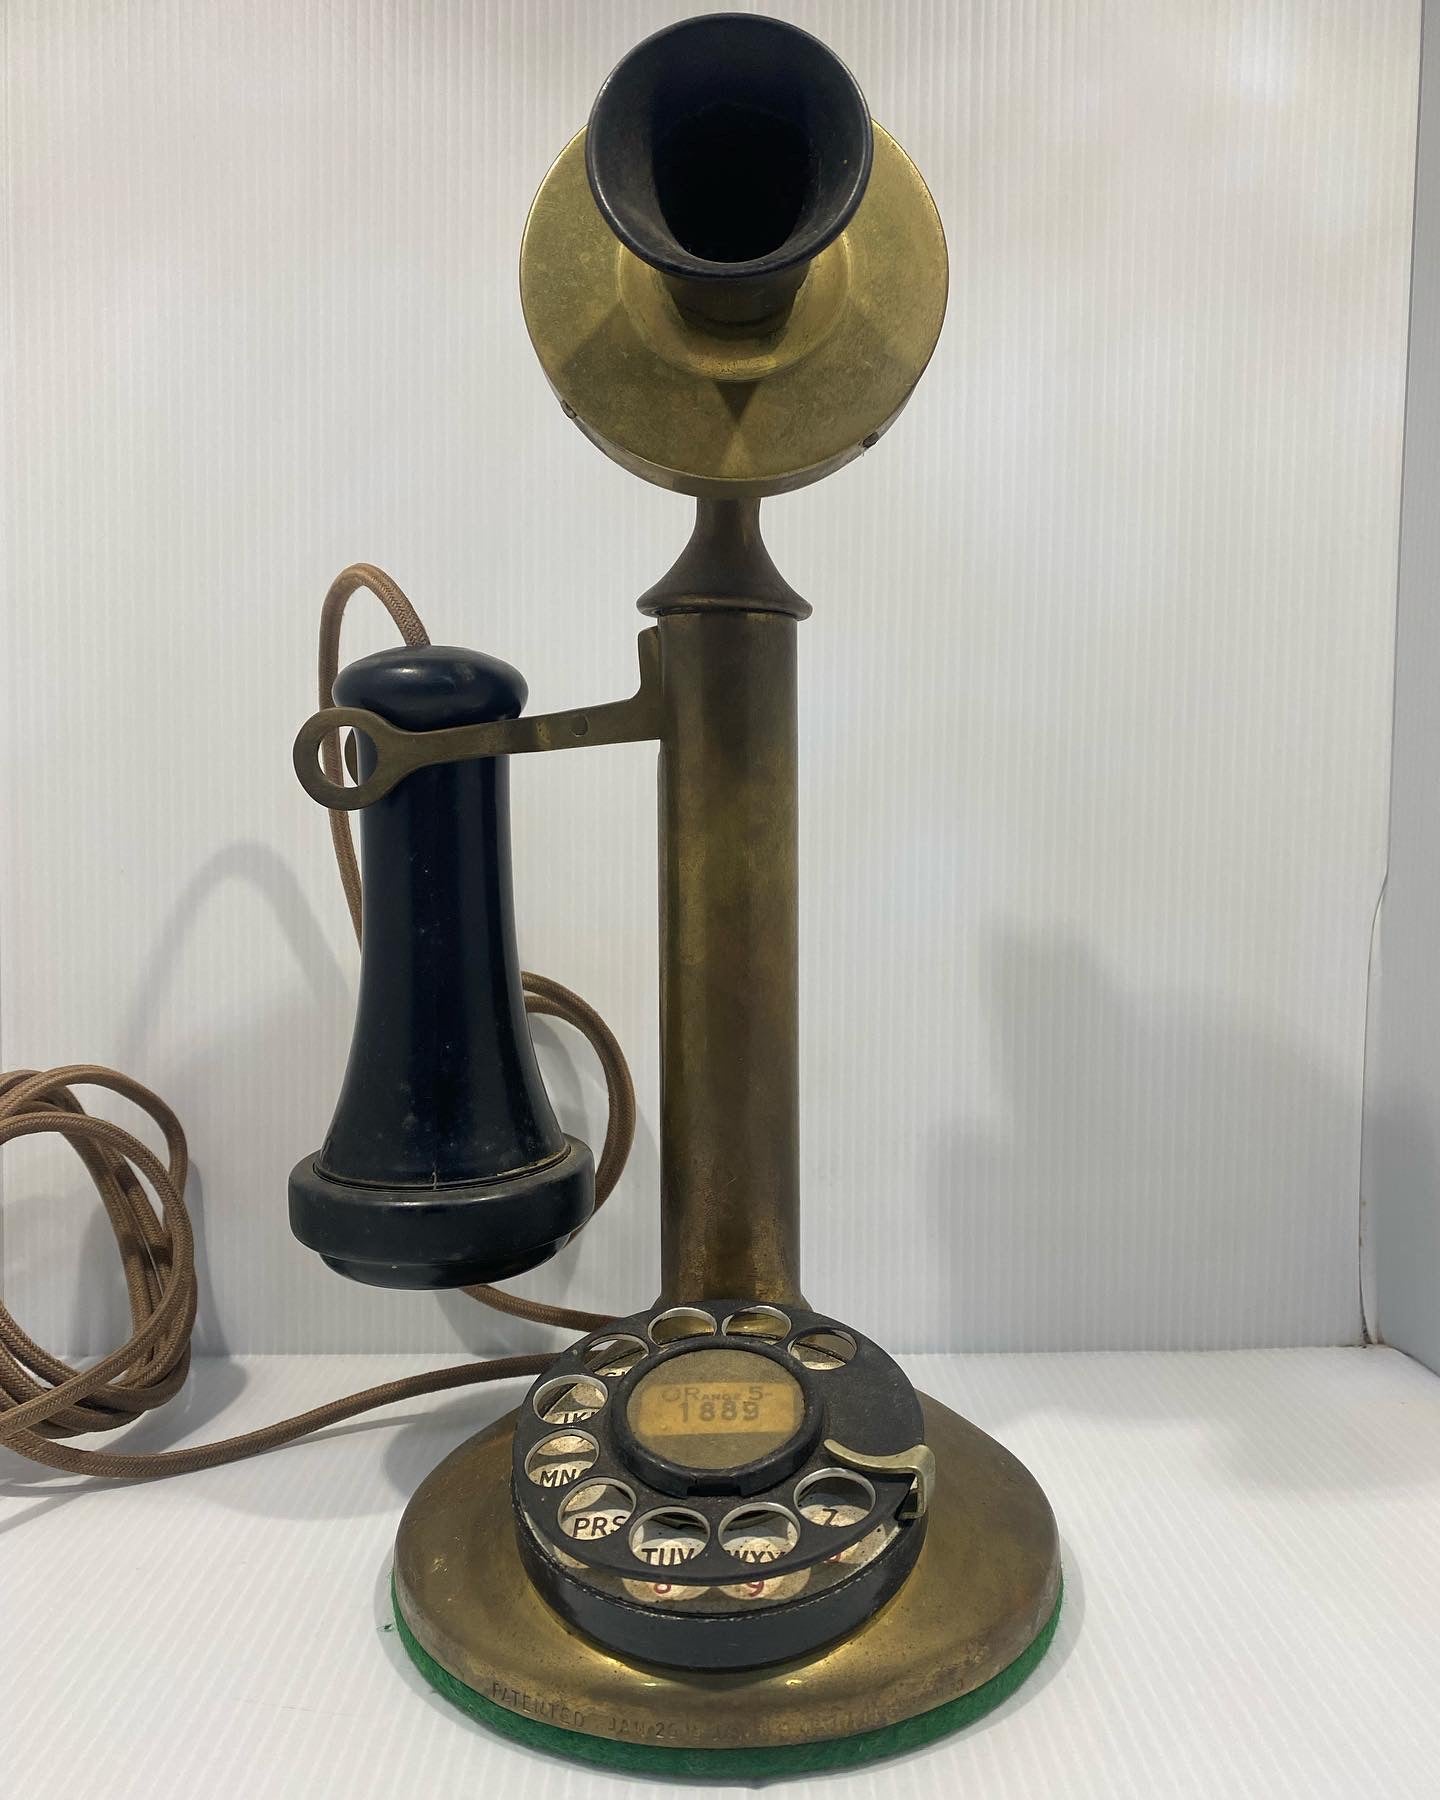 American Bell Candlestick Telephone. 1910